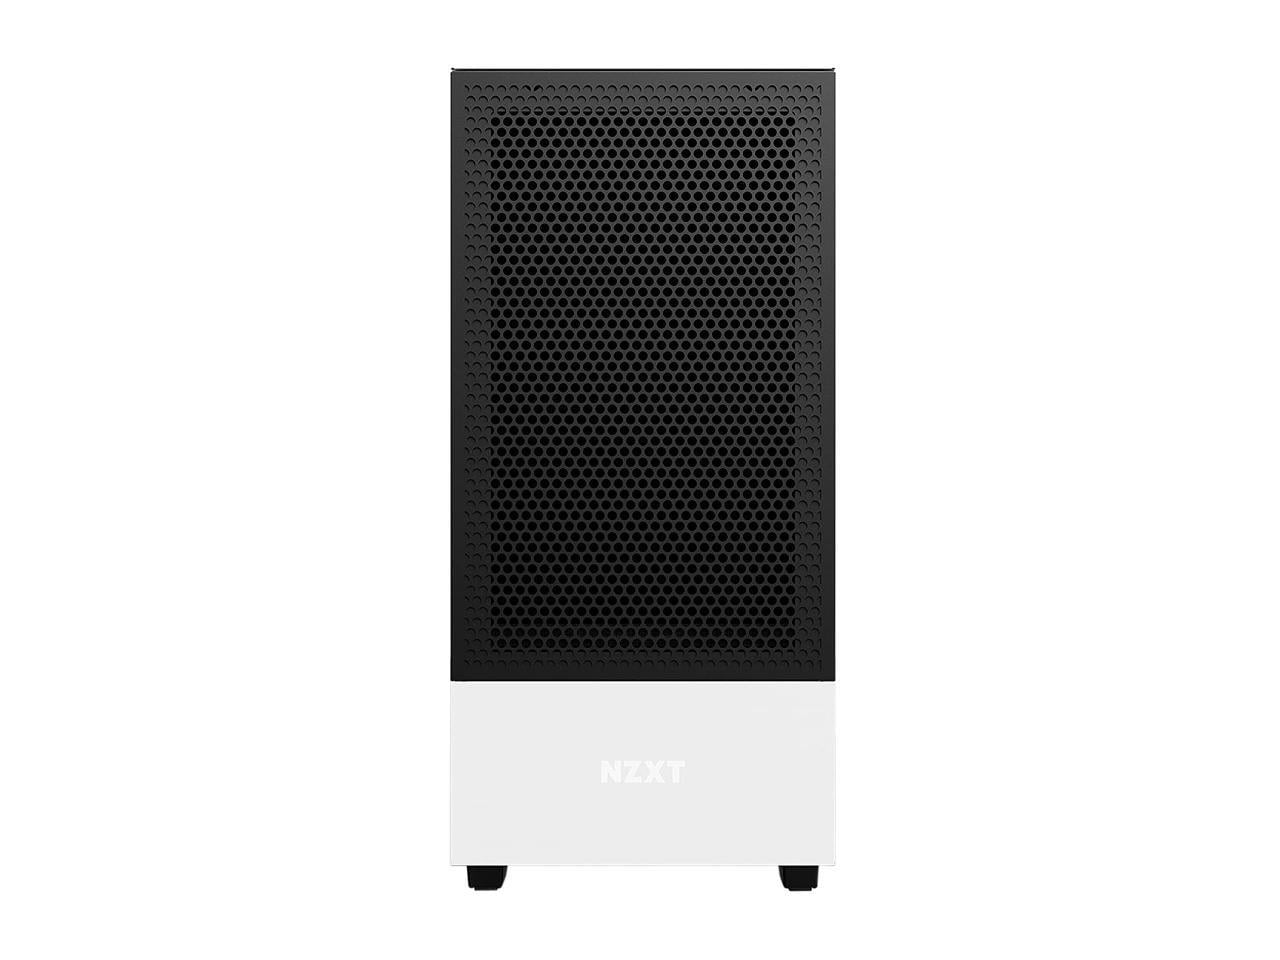 NZXT H510 Flow Matte Black - Compact ATX PC Gaming Case - Tempered